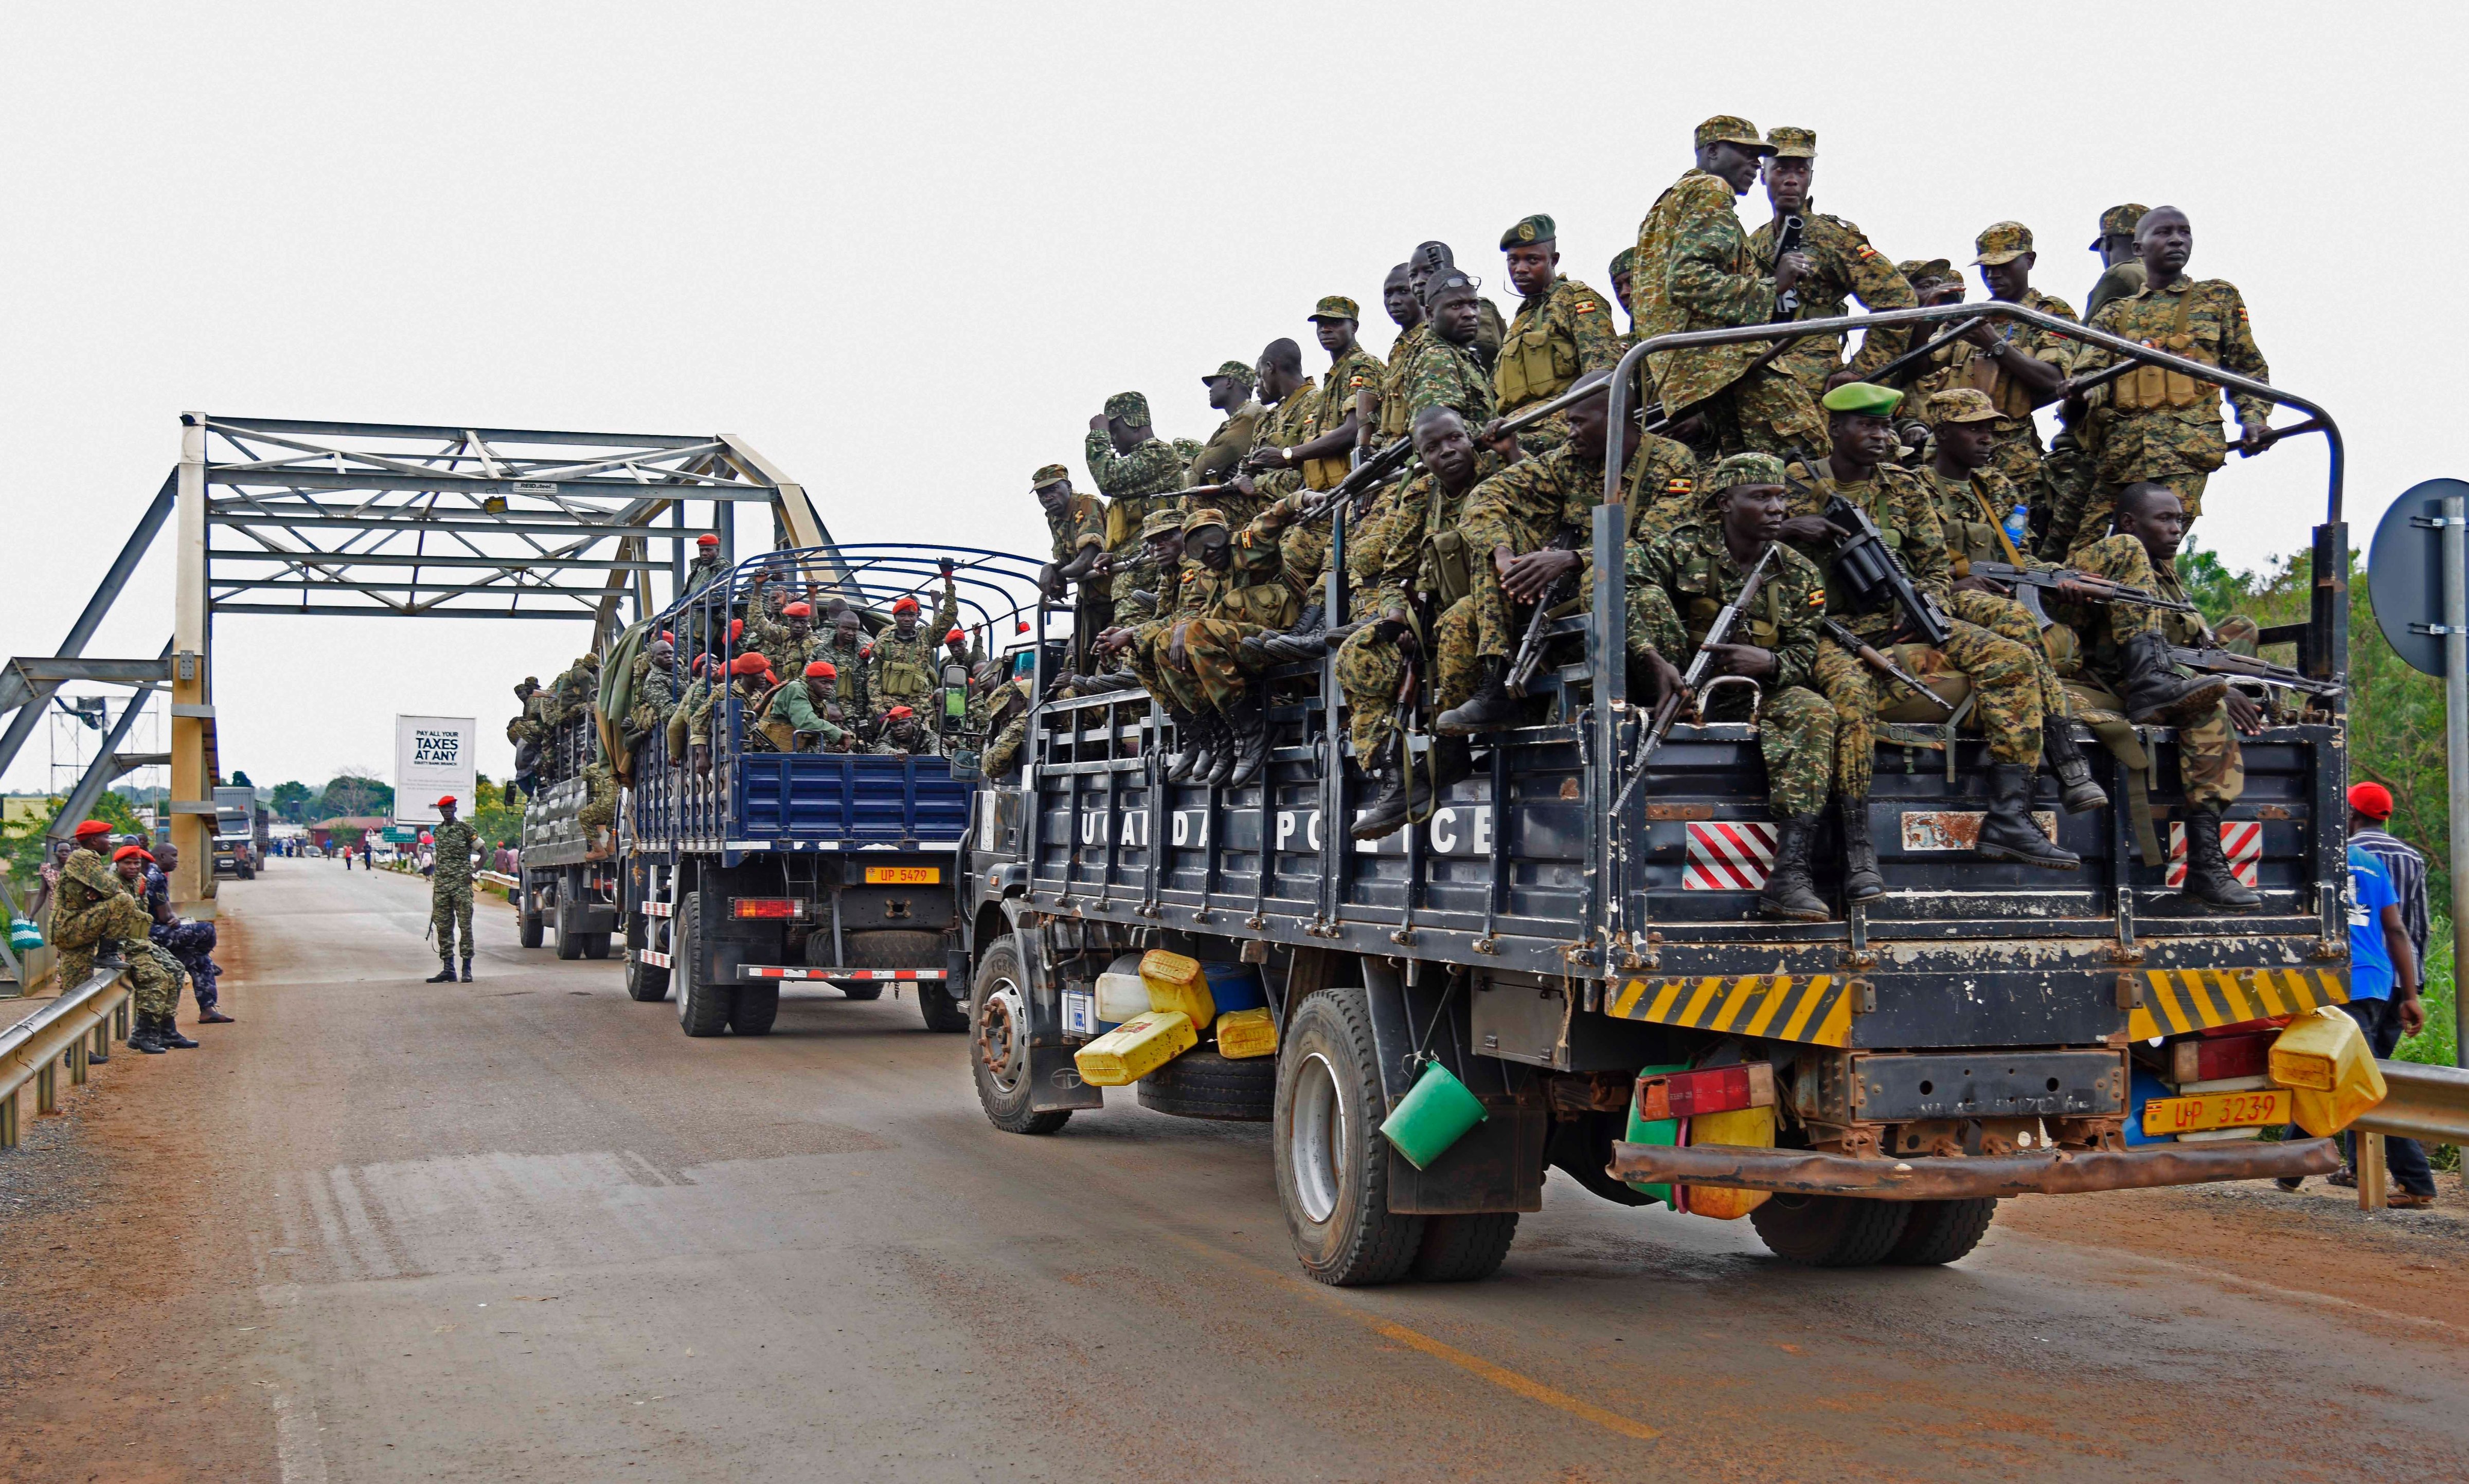 Uganda military personnel are seen atop military and police trucks as they drive towards Juba in South Sudan at Nimule border point on July 14, 2016. (Isaac Kasamani—AFP/Getty Images)